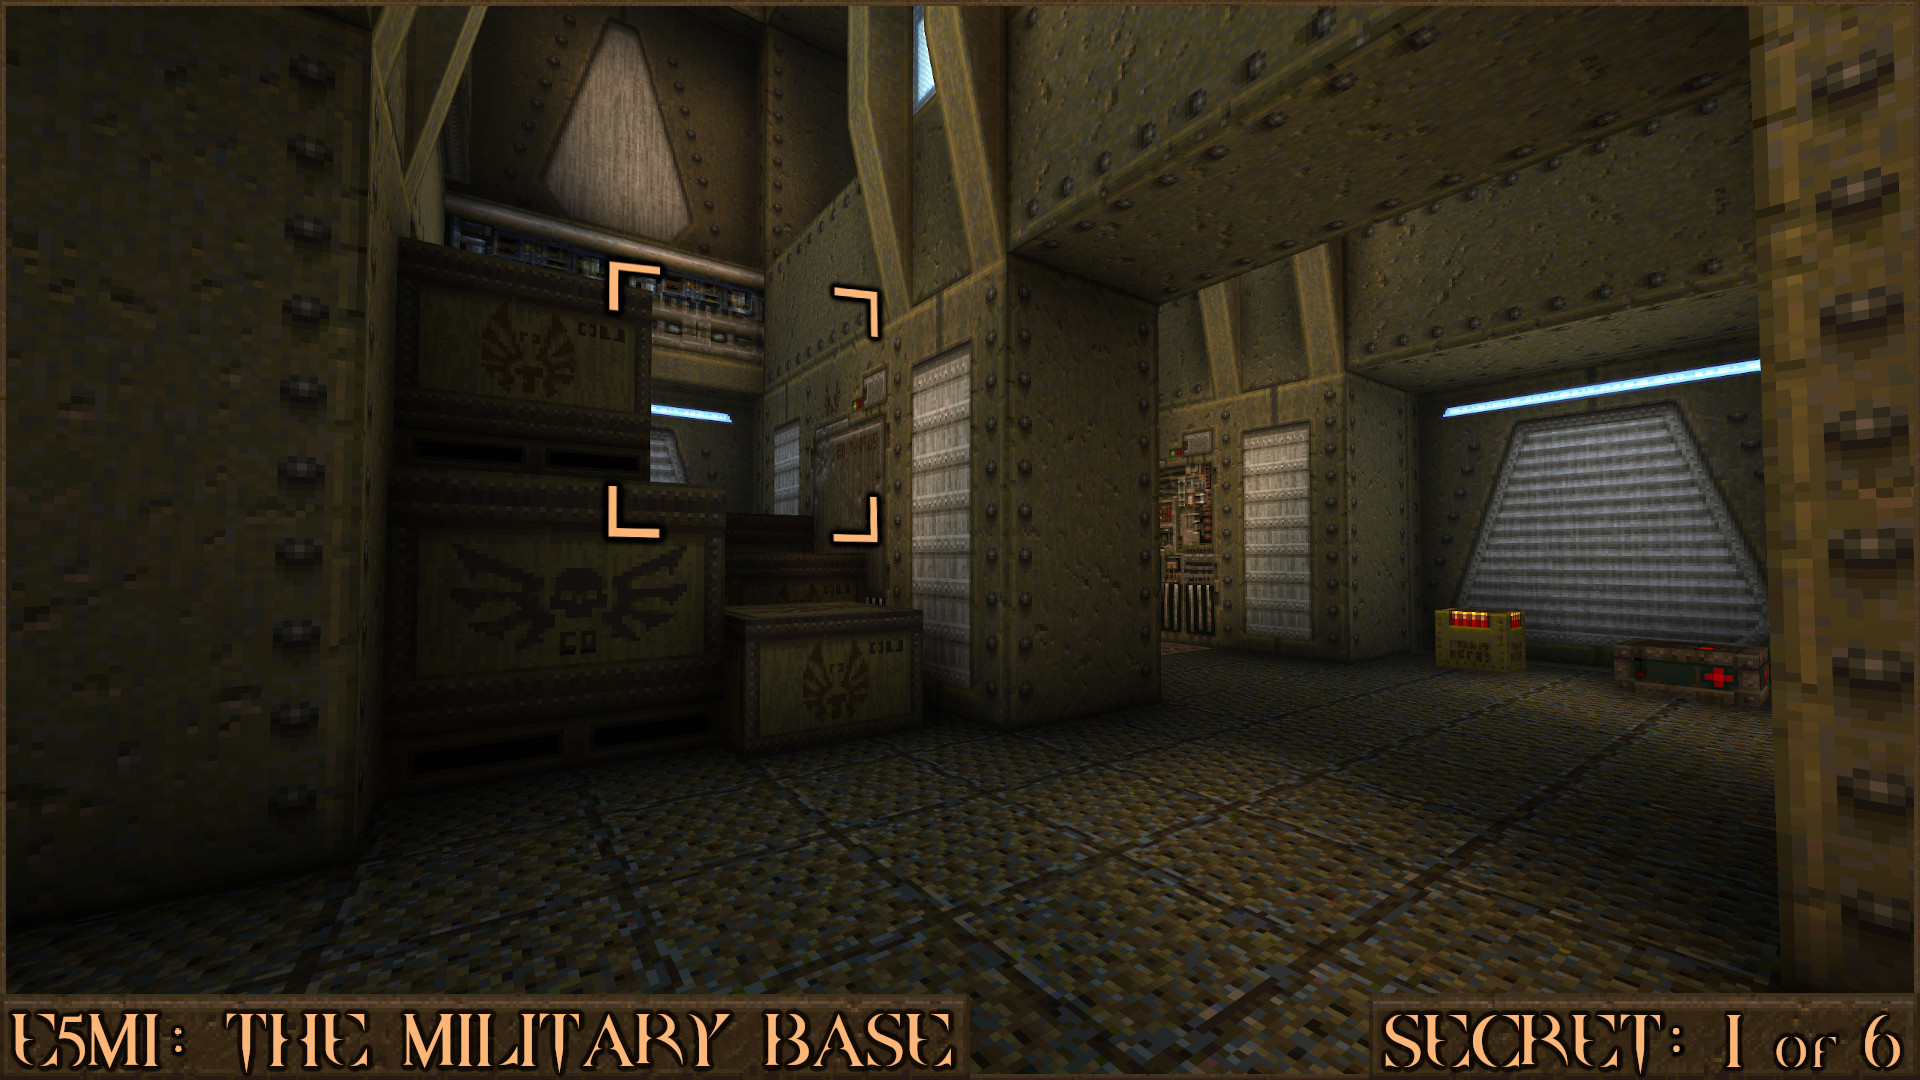 Quake Finding All Secrets in Quake Expansion pack: Dimension of the Past - E5M1: The Military Base - 31C2609